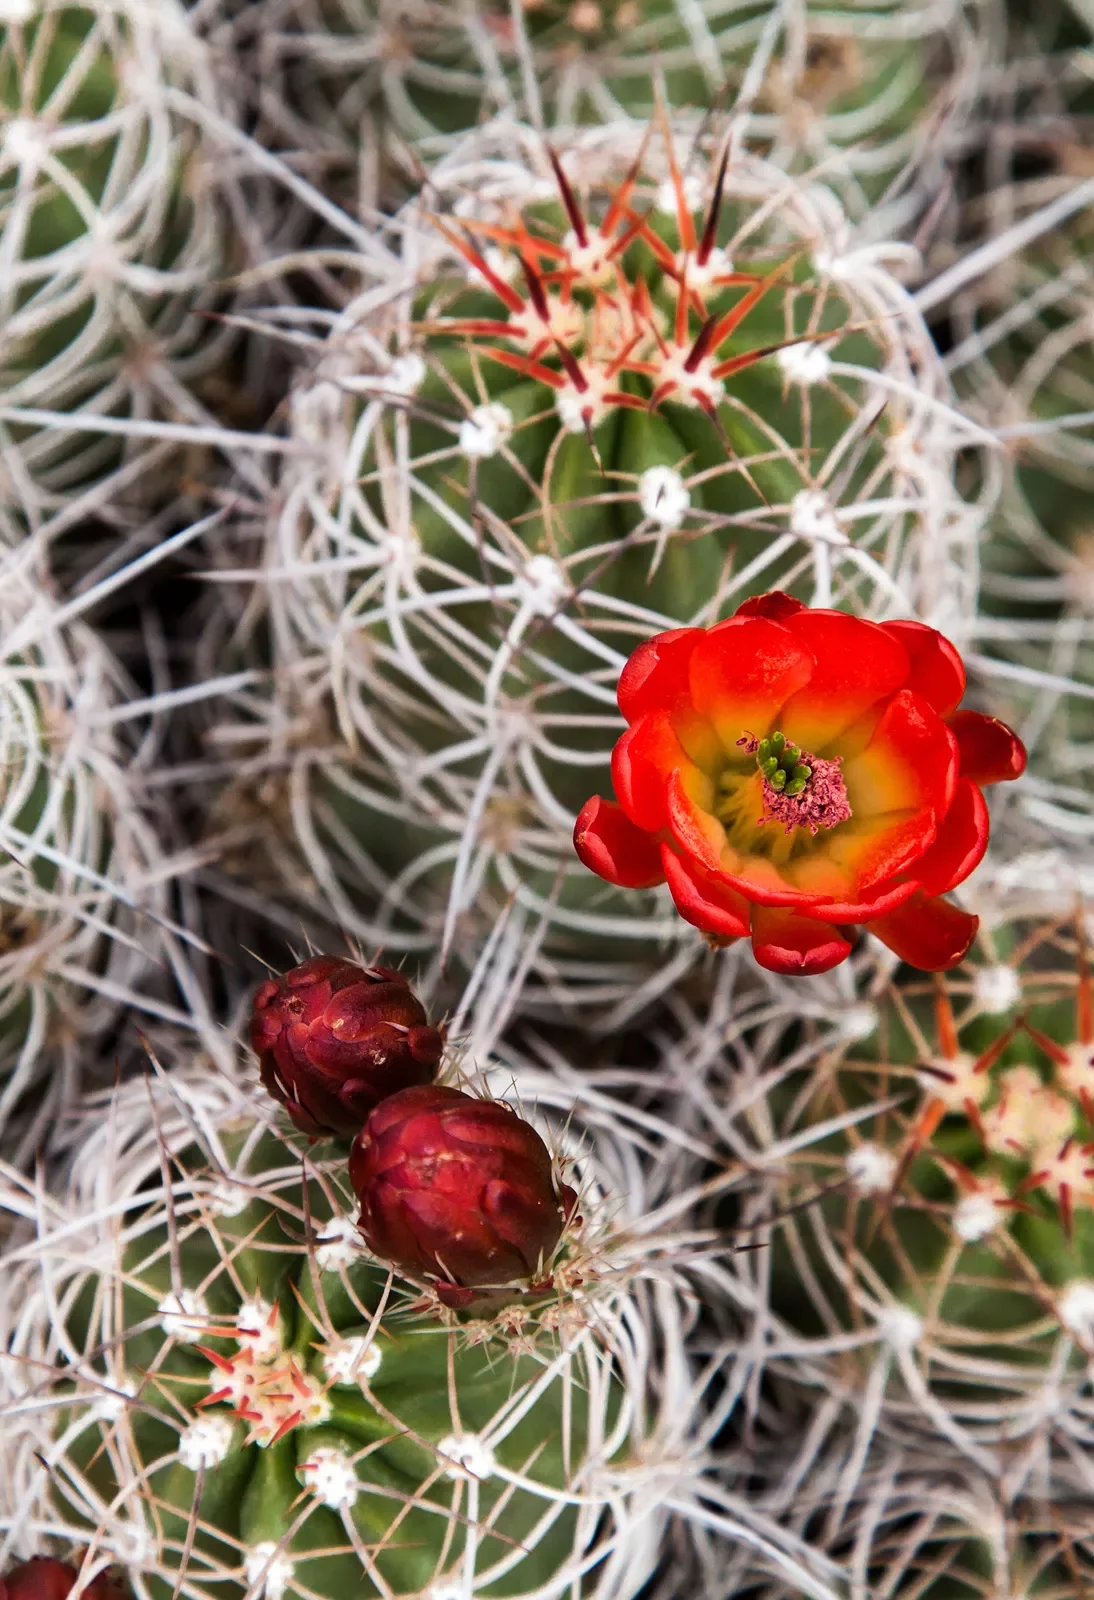 Shot of a cactus with colorful flower.